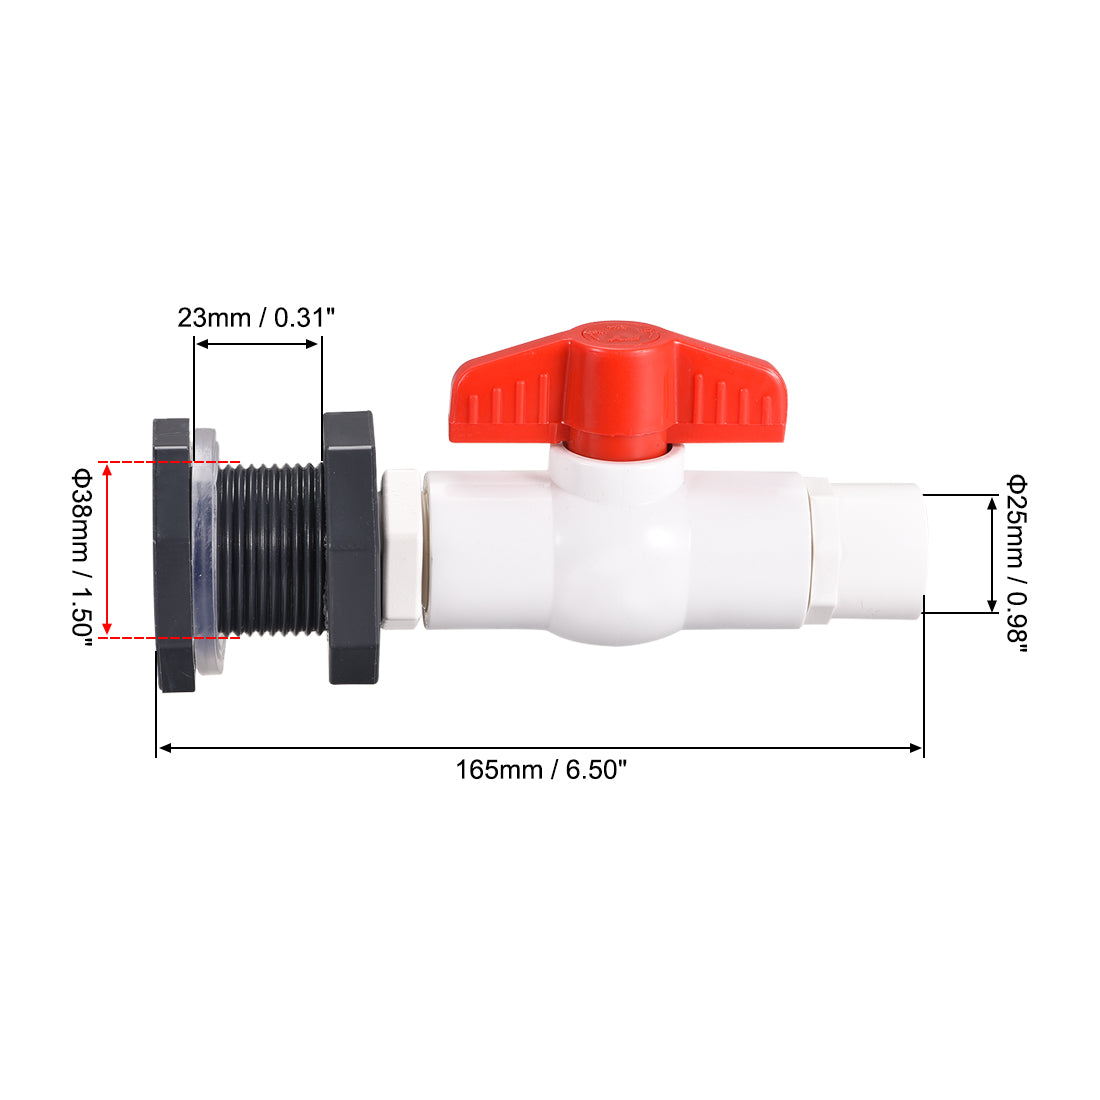 Uxcell Uxcell PVC Ball Valve Connector Spigot Kit G1 Lengthen, with Bulkhead, Grey White Red